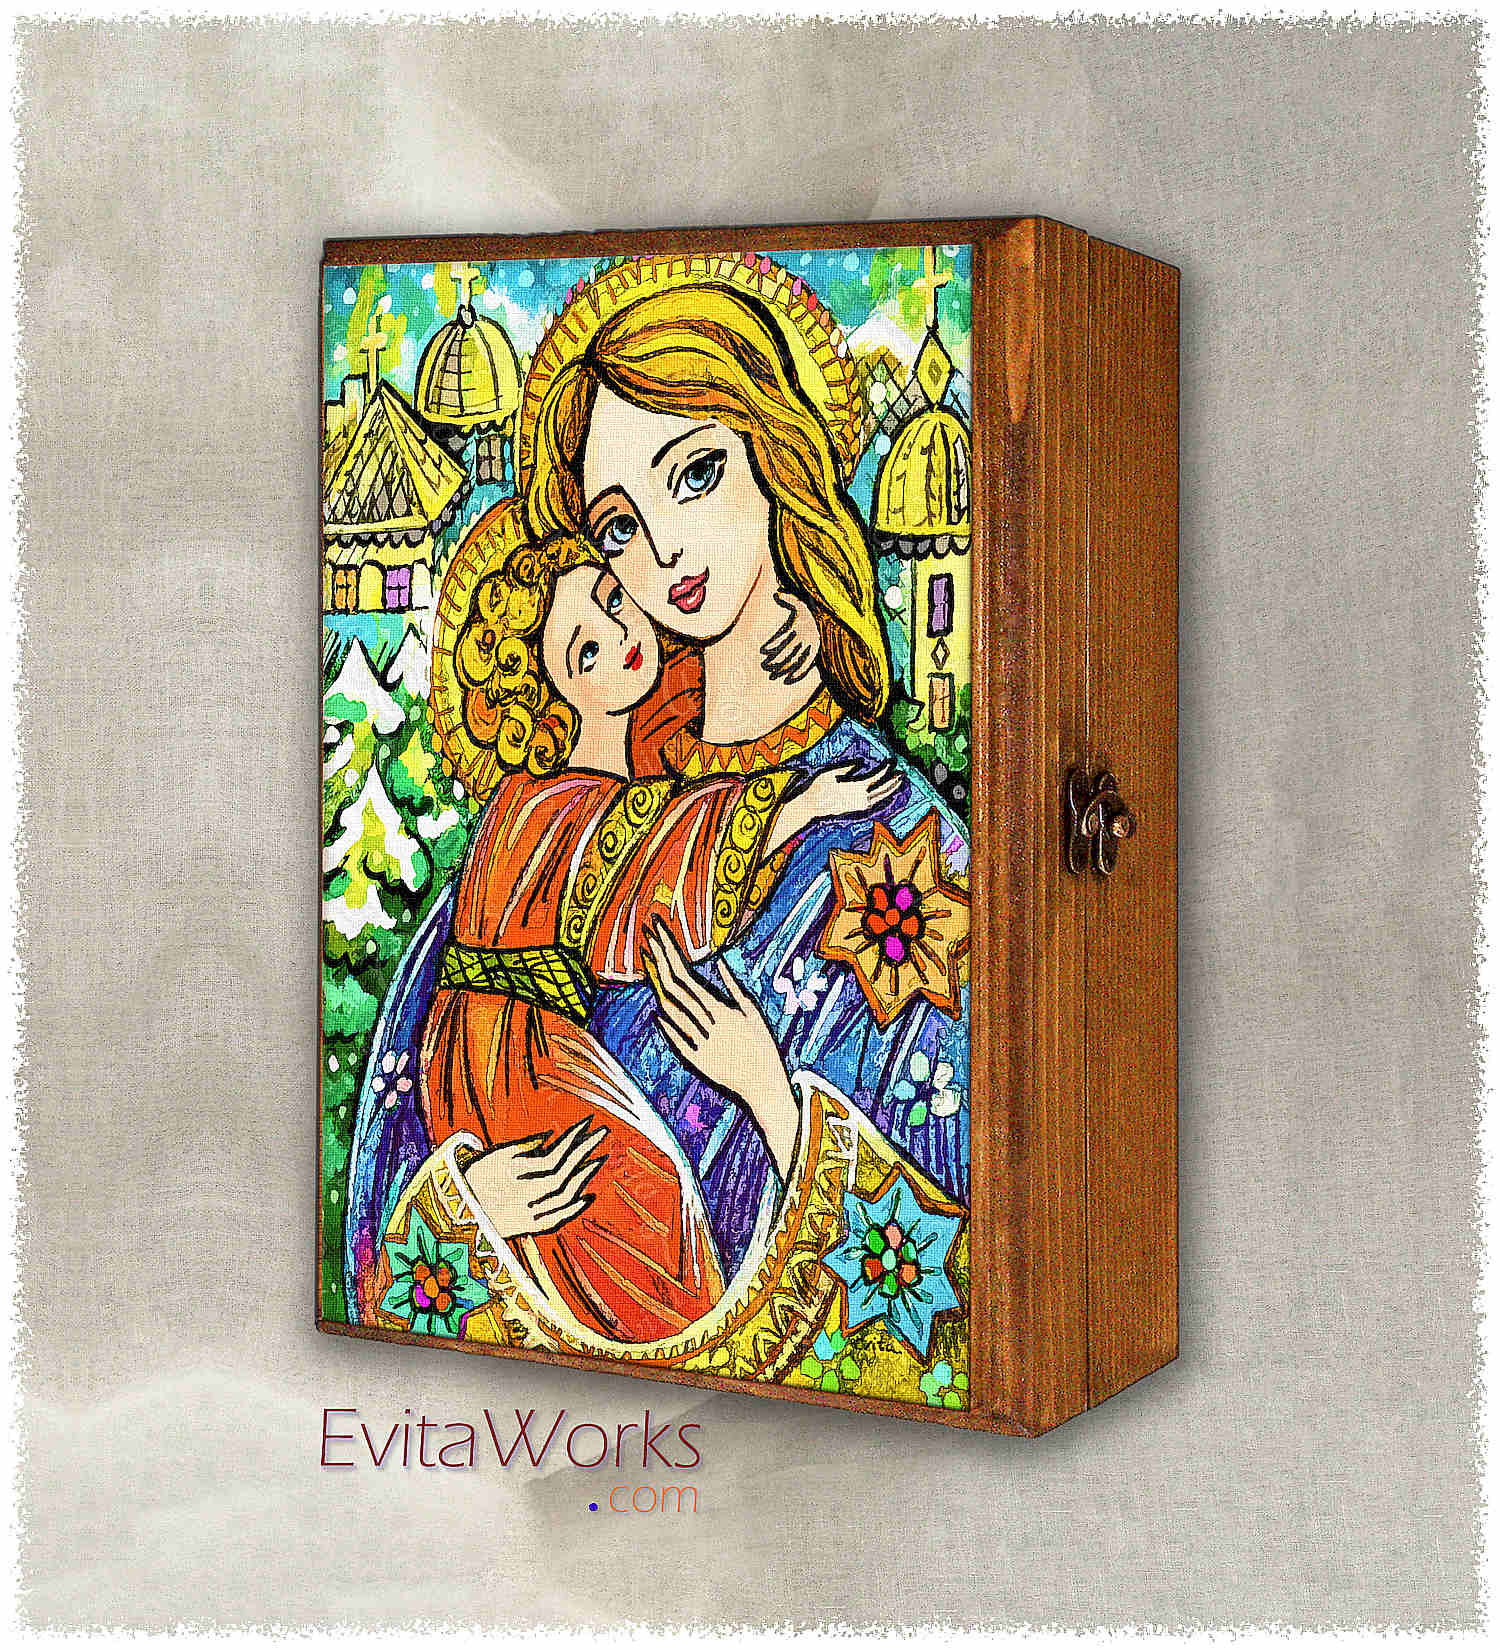 Hit to learn about "Winter Church, Madonna and Child" on jewelboxes